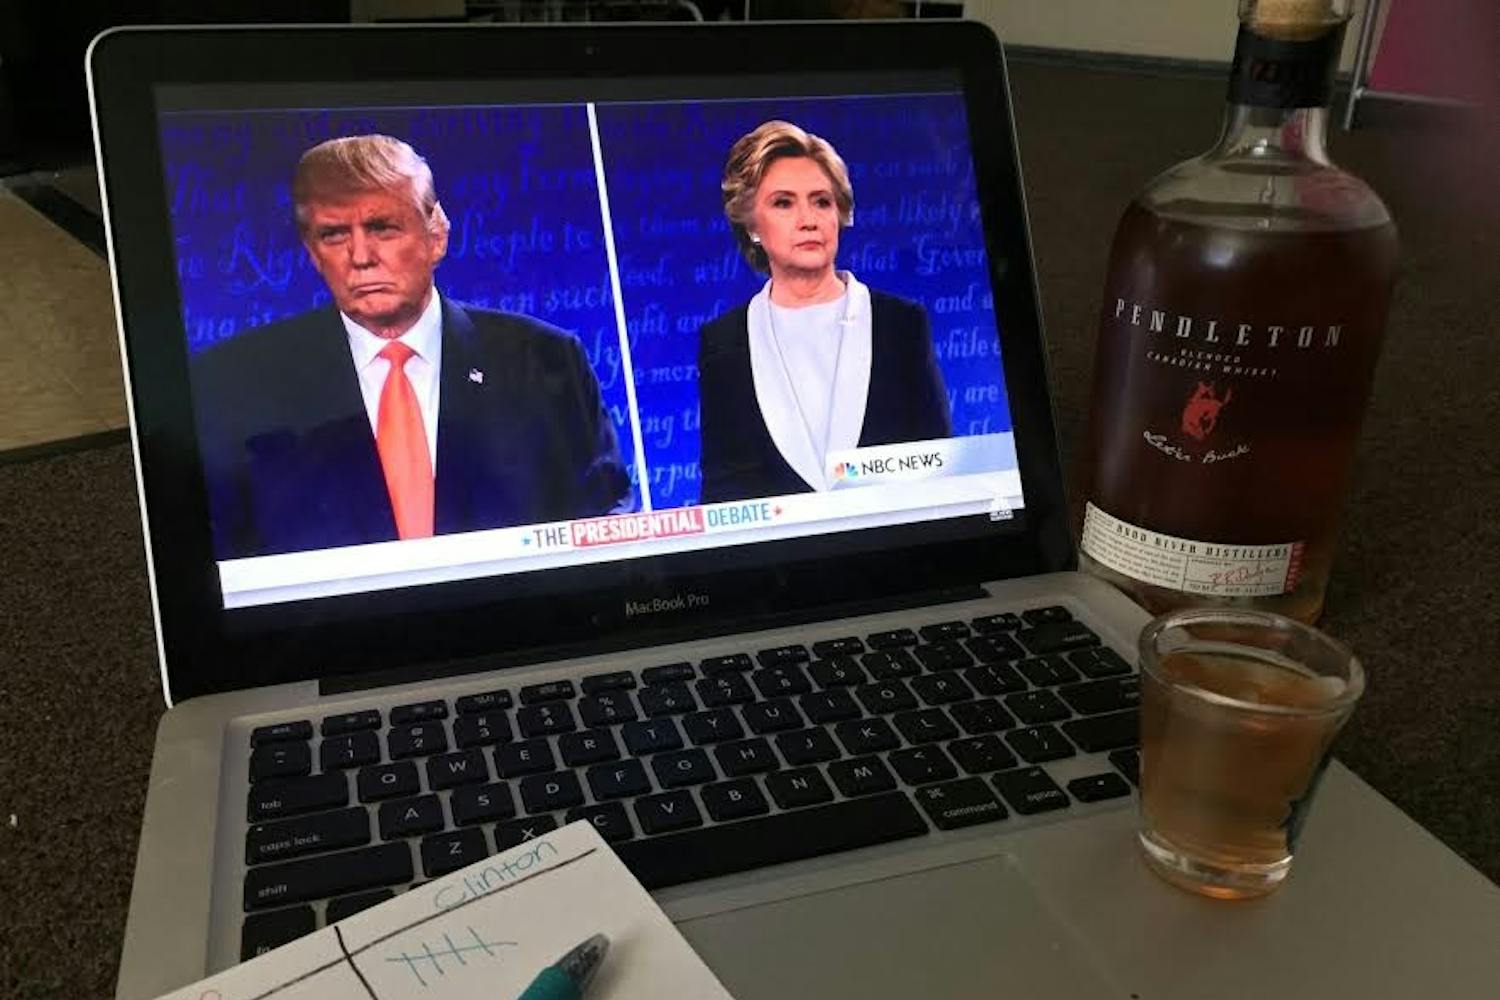 Photo illustrates&nbsp;Candidates Donald Trump and Hilary Clinton at the second presidential debate with a score card of how many "buzzwords" they have said.